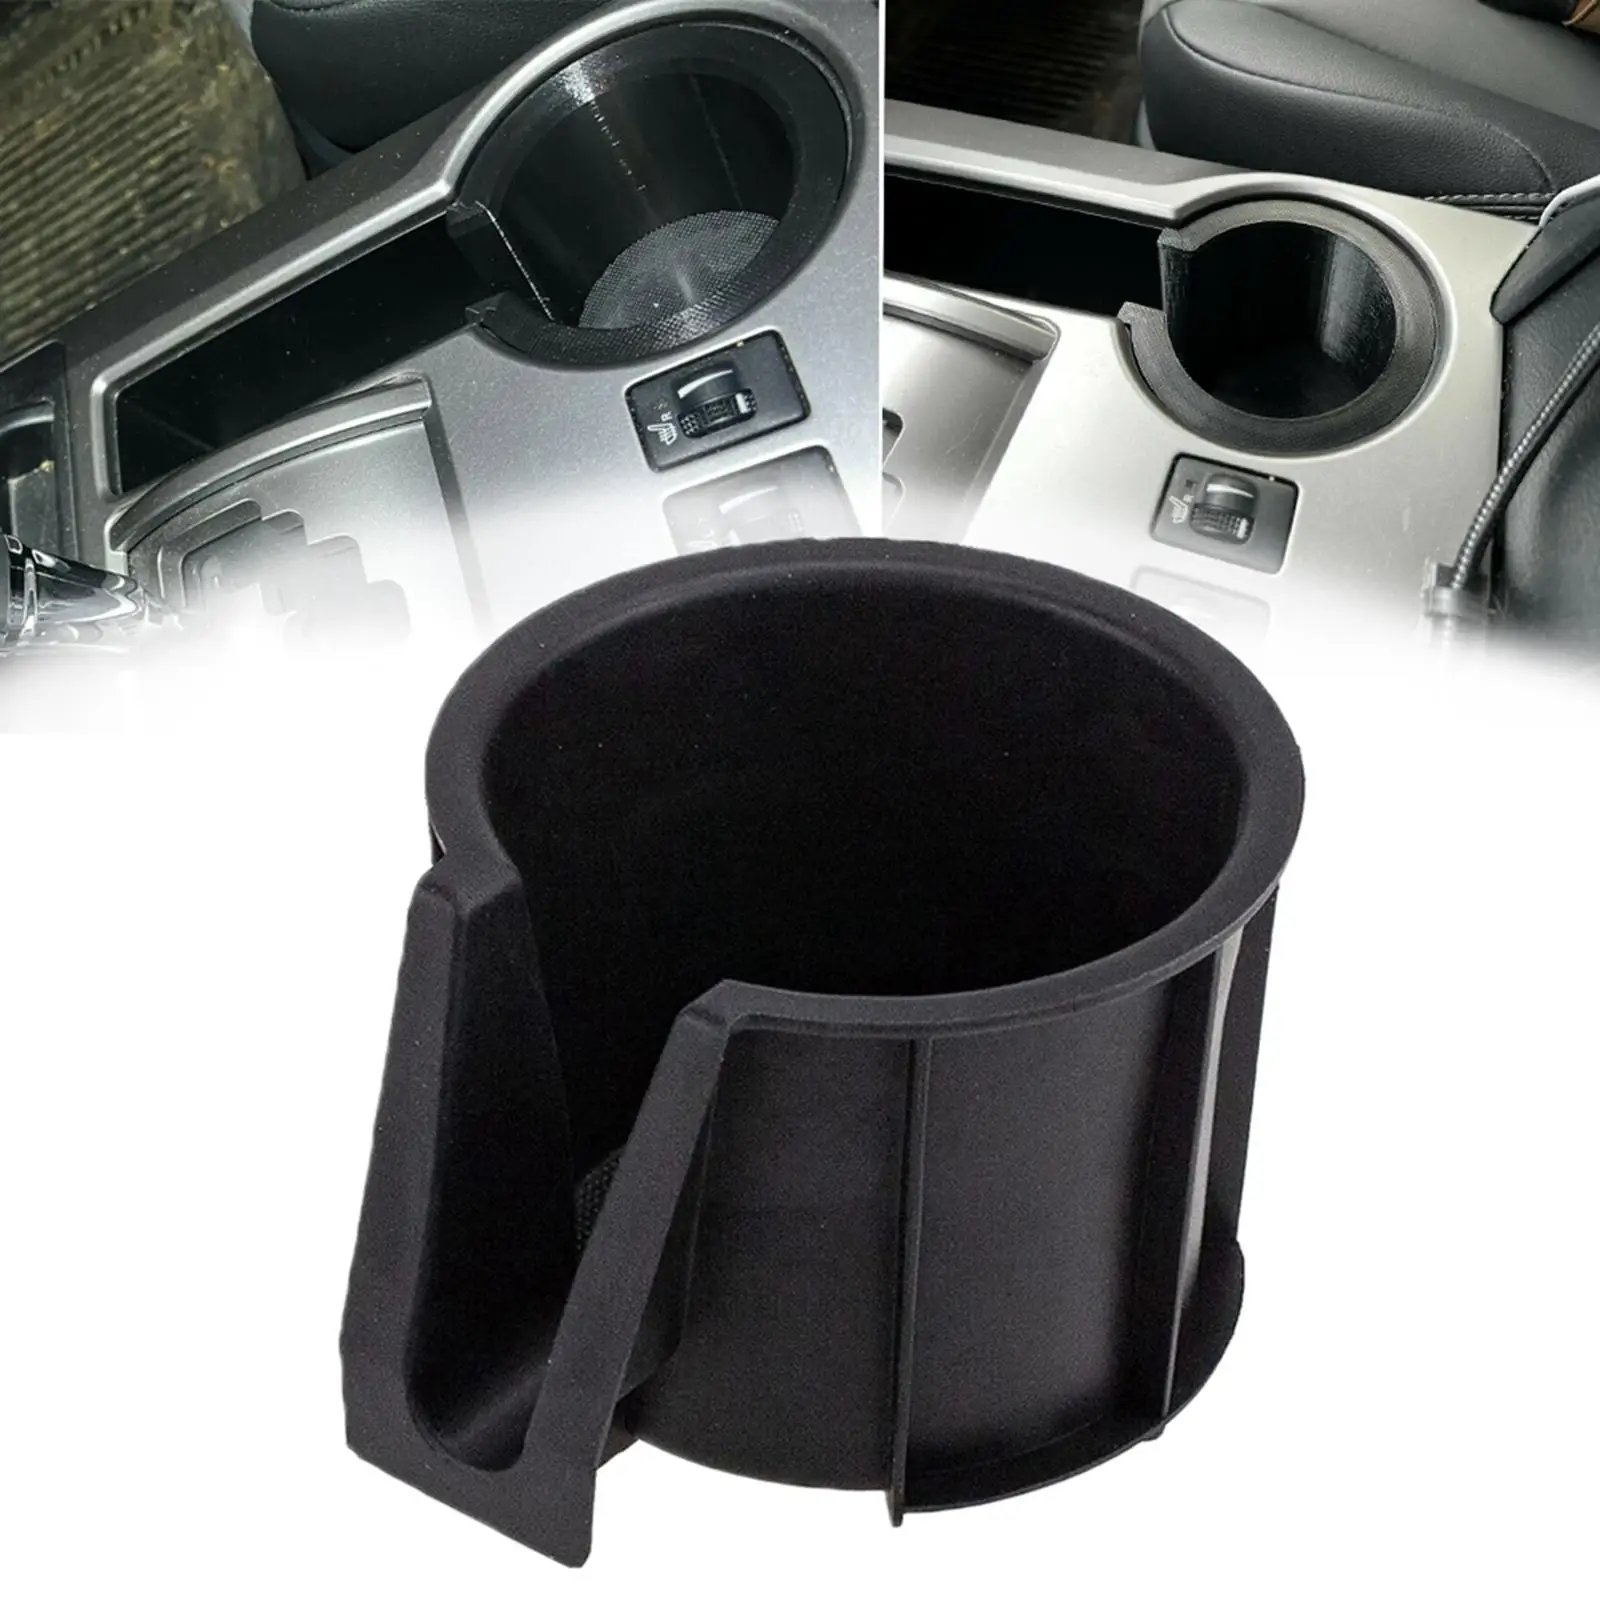 Console Cup Holder Insert Spare Parts Replacement for 66992-35030